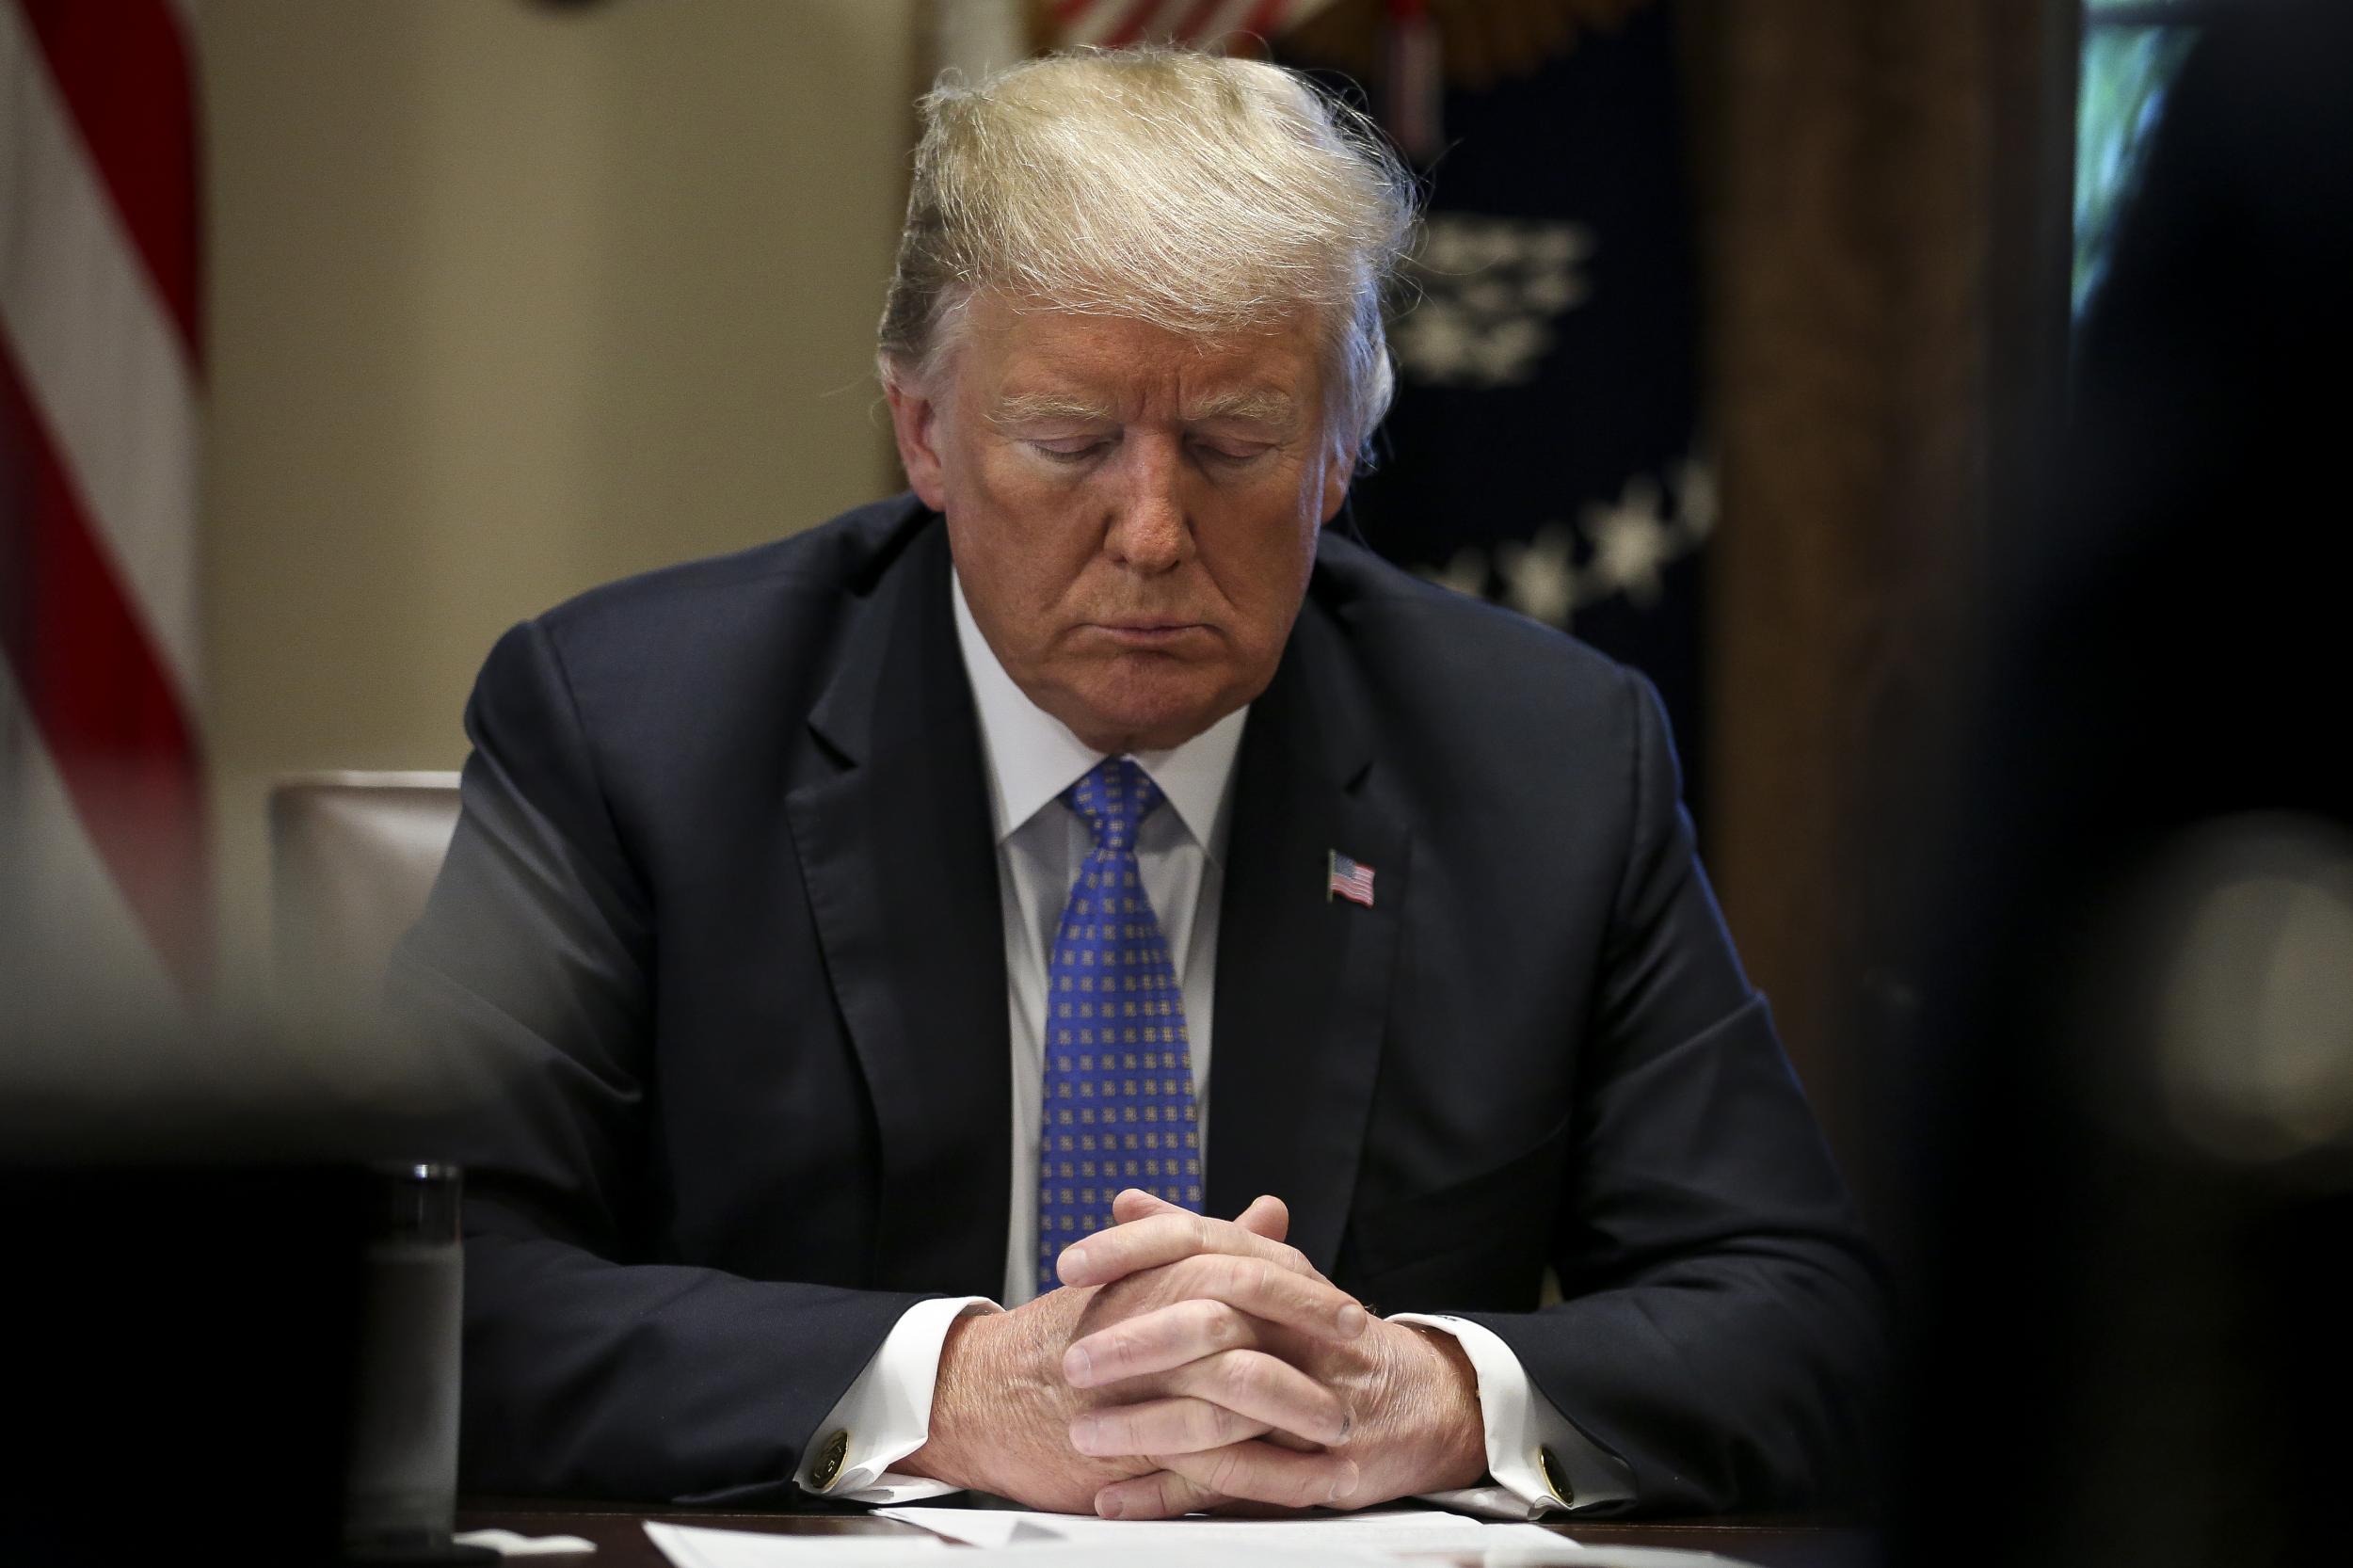 Donald Trump prays during a meeting with inner city pastors in the Cabinet Room of the White House on 1 August 2018 in Washington, DC.